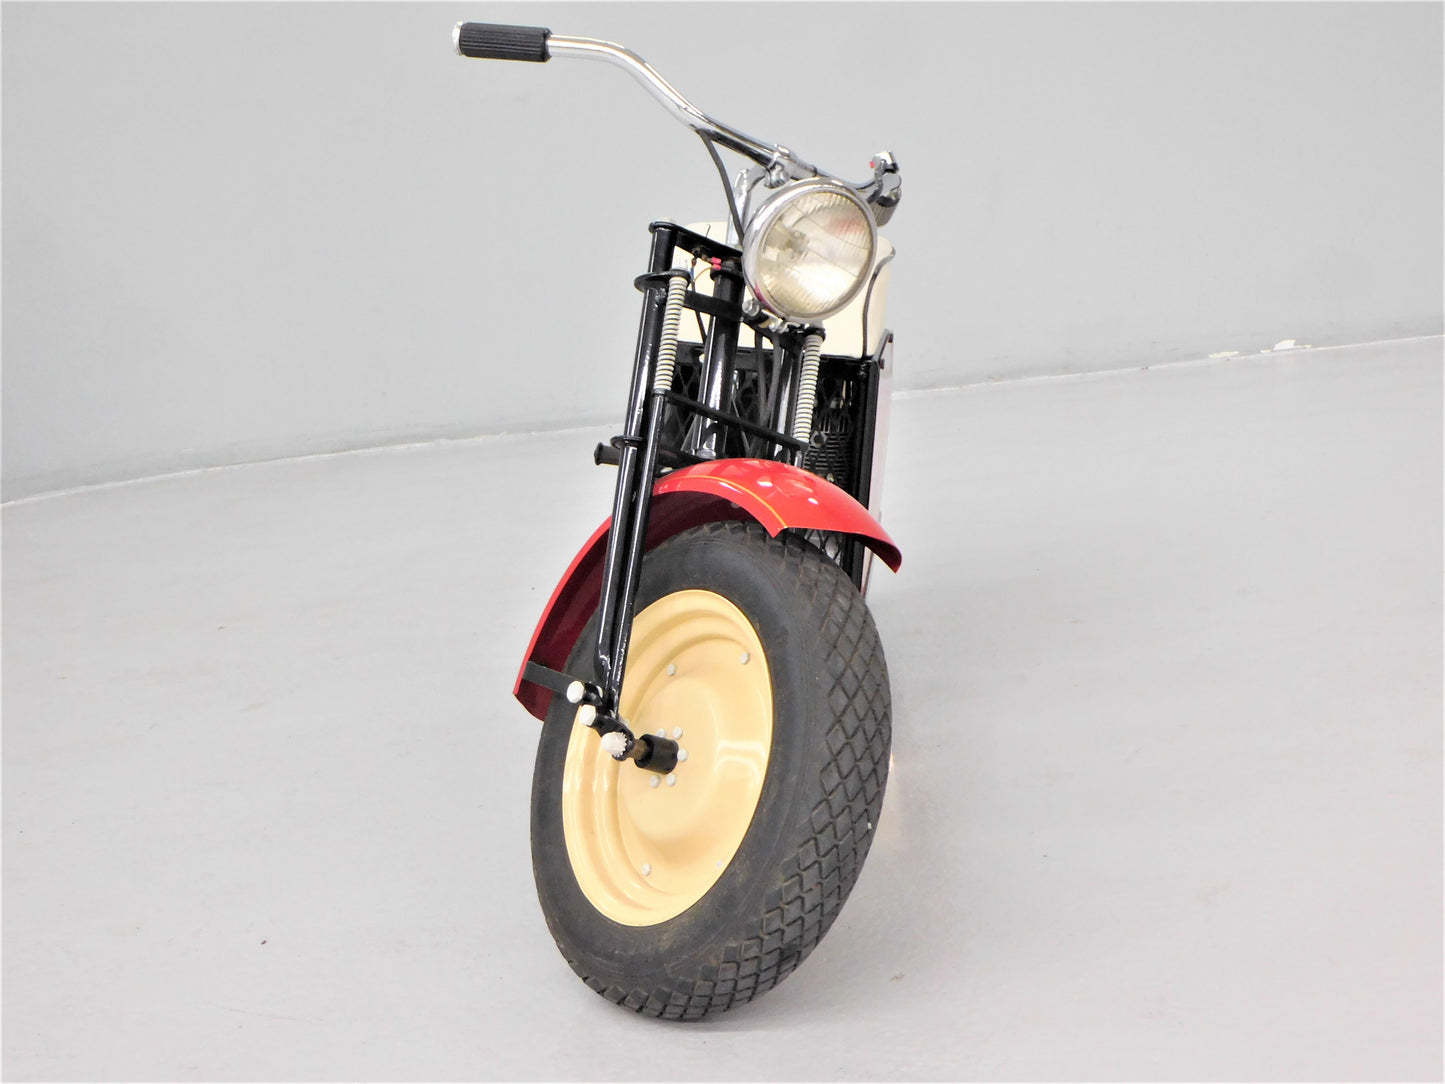 Mid-1950s Simplex Automatic Scooter